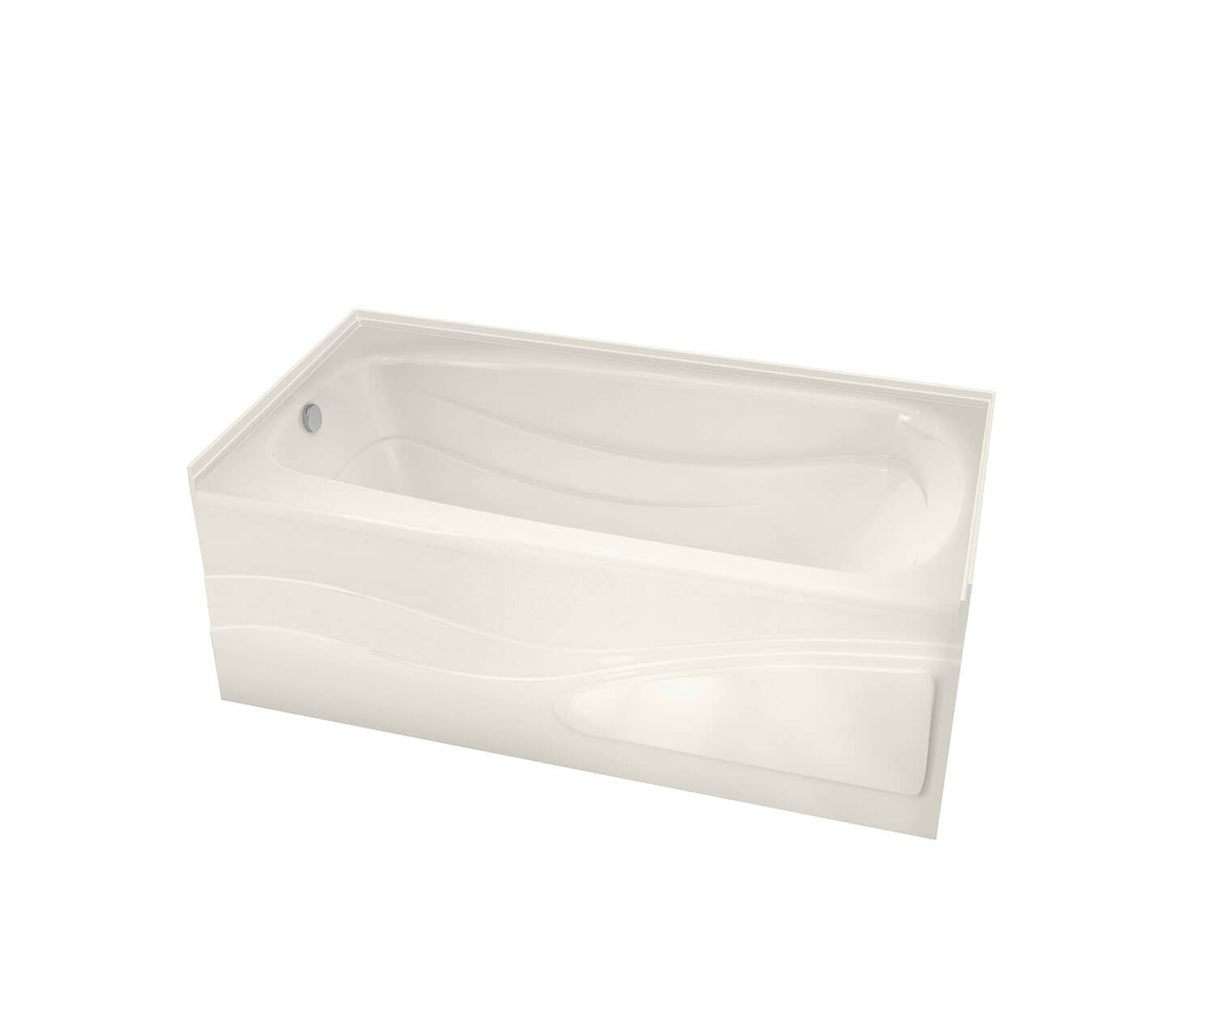 MAAX 102205-003-007-001 Tenderness 6042 Acrylic Alcove Left-Hand Drain Whirlpool Bathtub in Biscuit